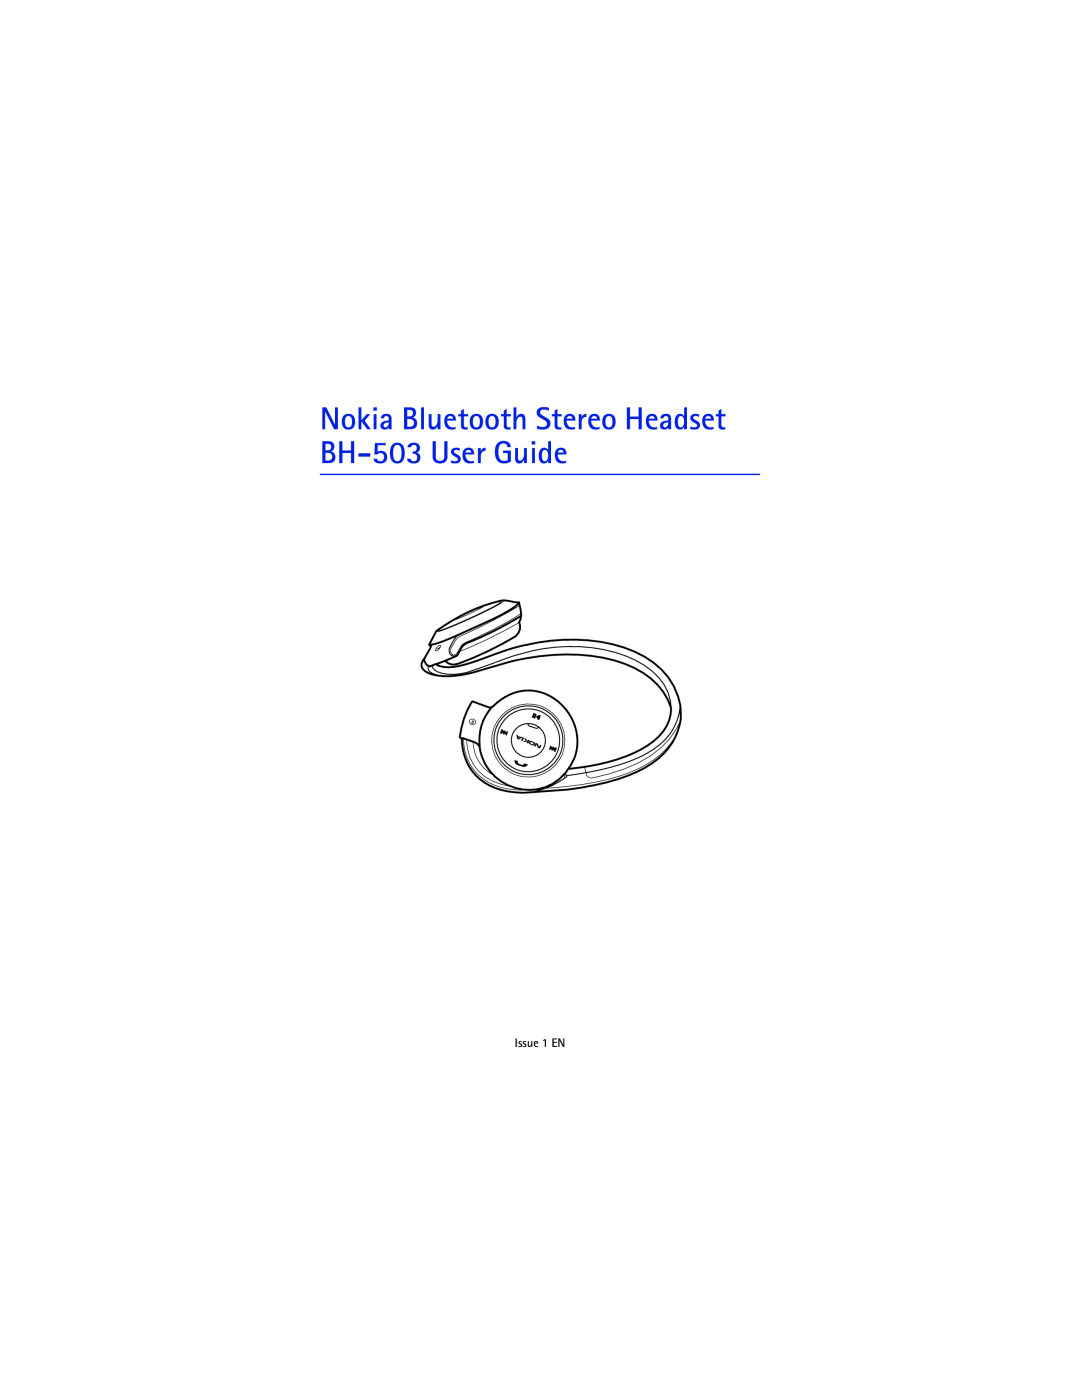 Nokia manual Nokia Bluetooth Stereo Headset BH-503User Guide, Issue 1 EN 